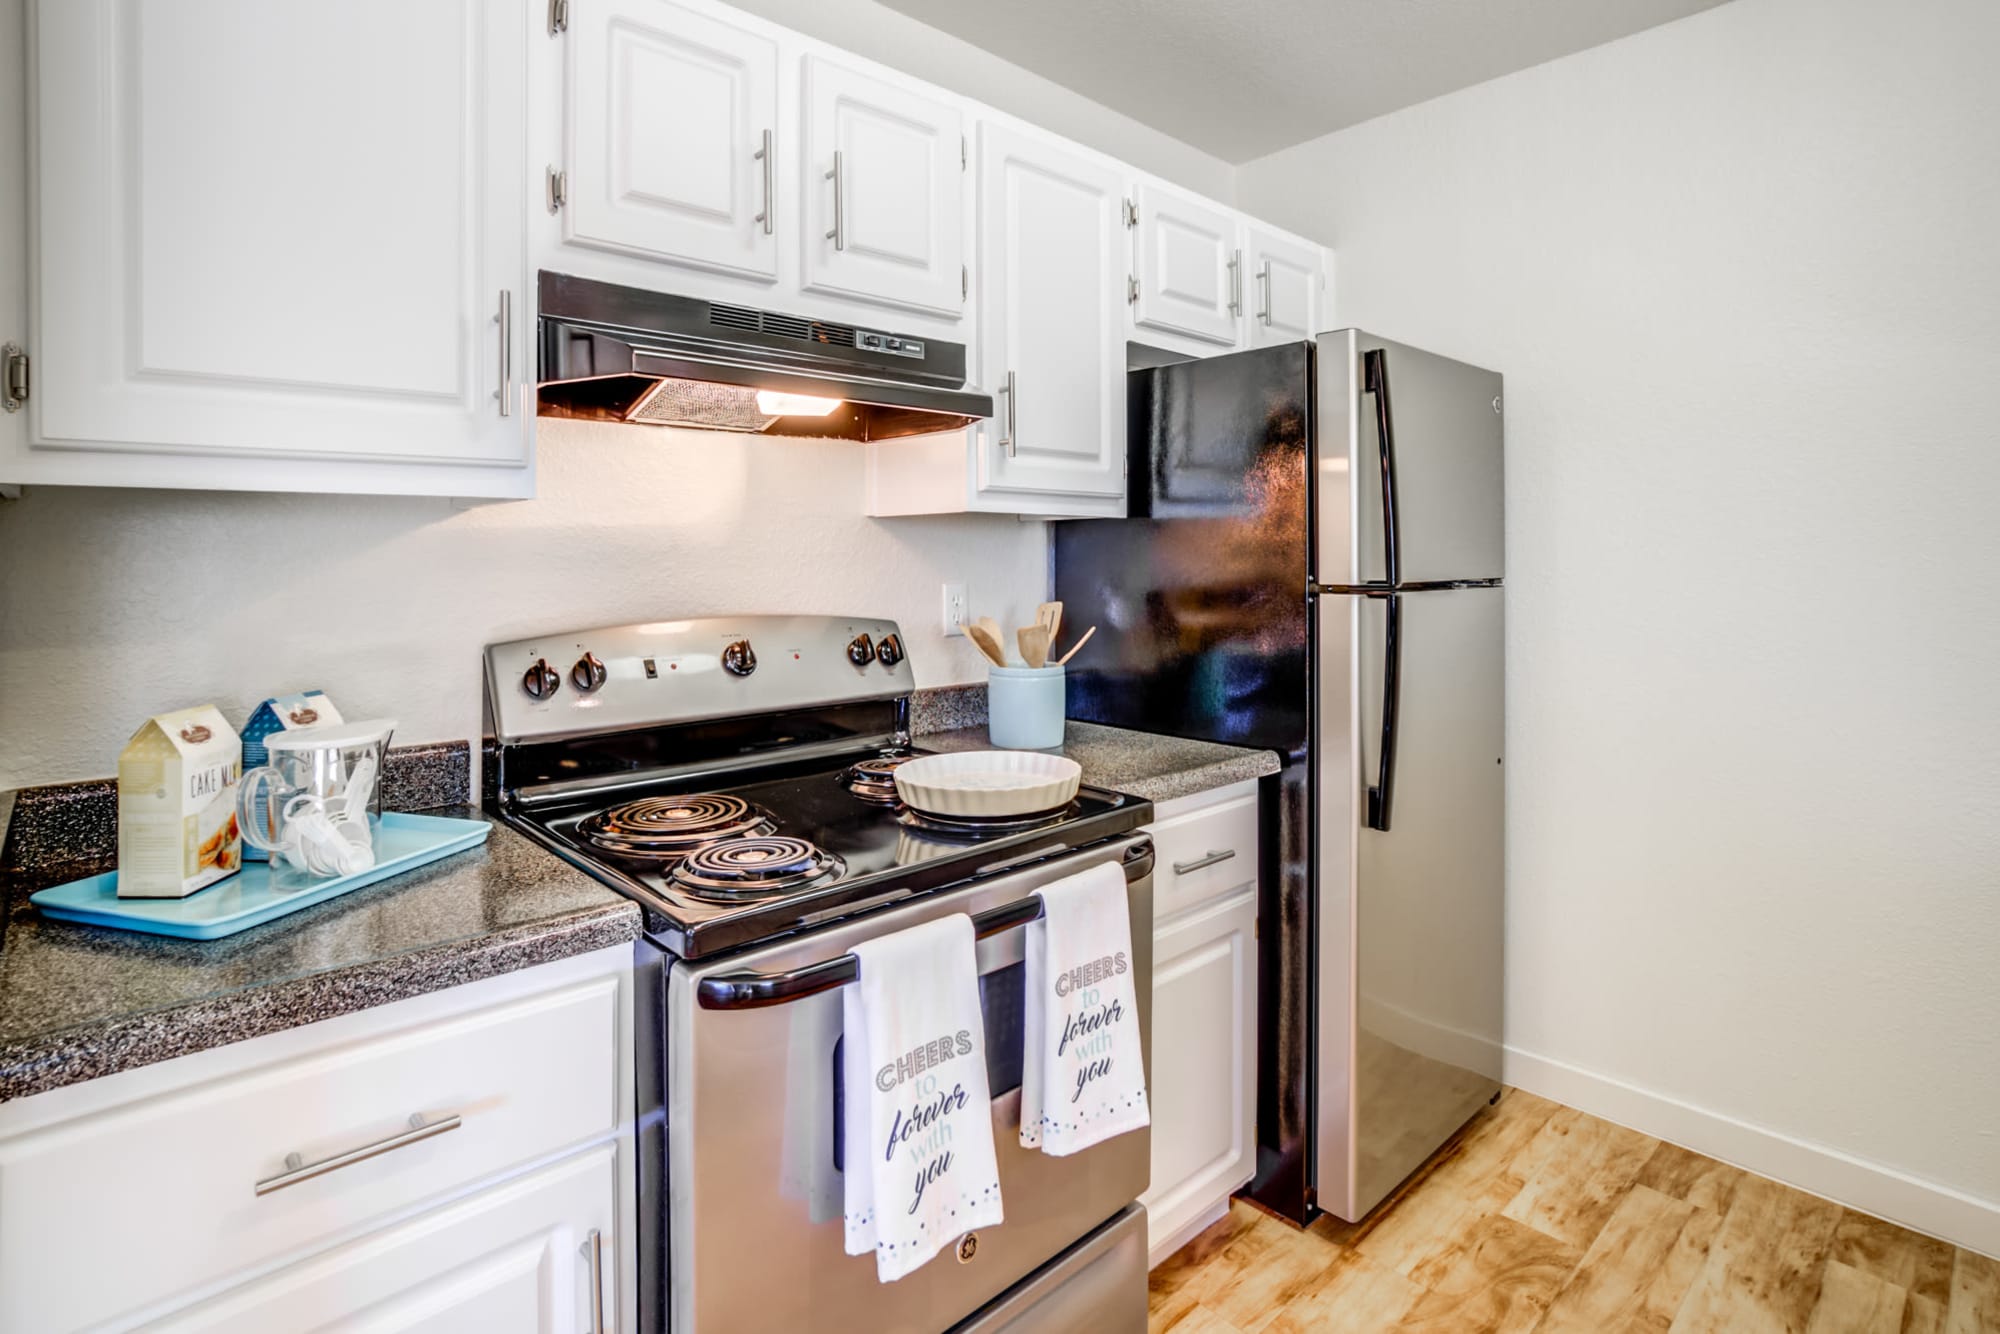 Fully Equipped Kitchen with Stainless steel appliances at Sommerset Apartments in Vacaville, CA